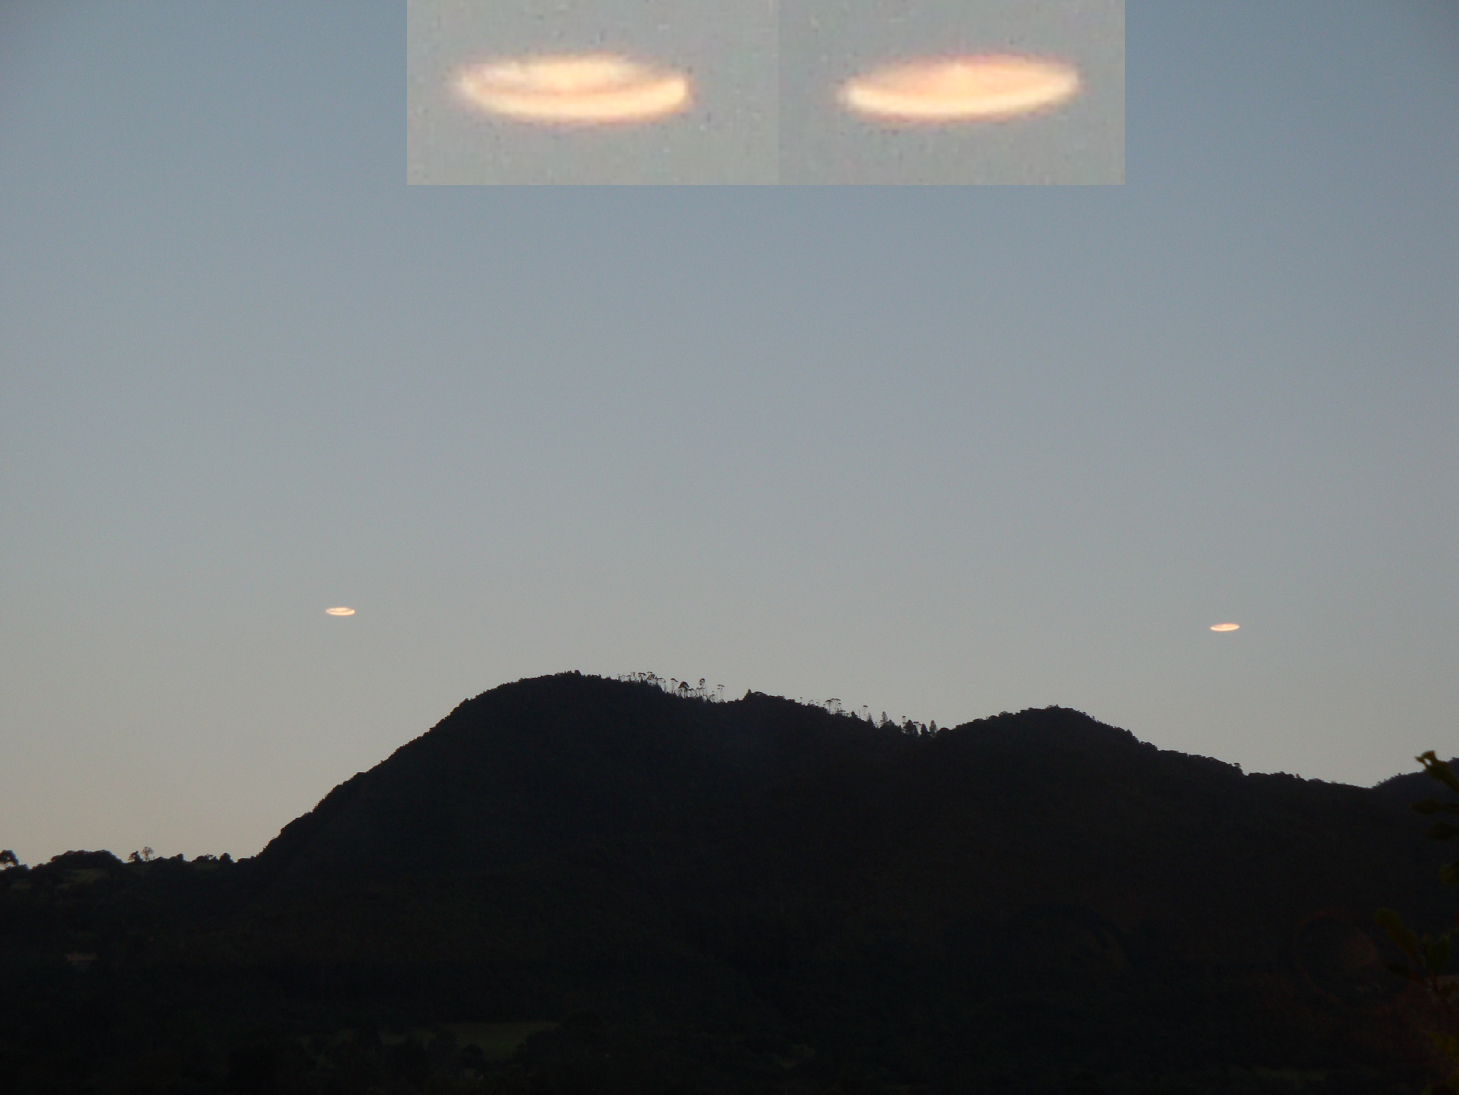 Where can you find information on current UFO sightings?